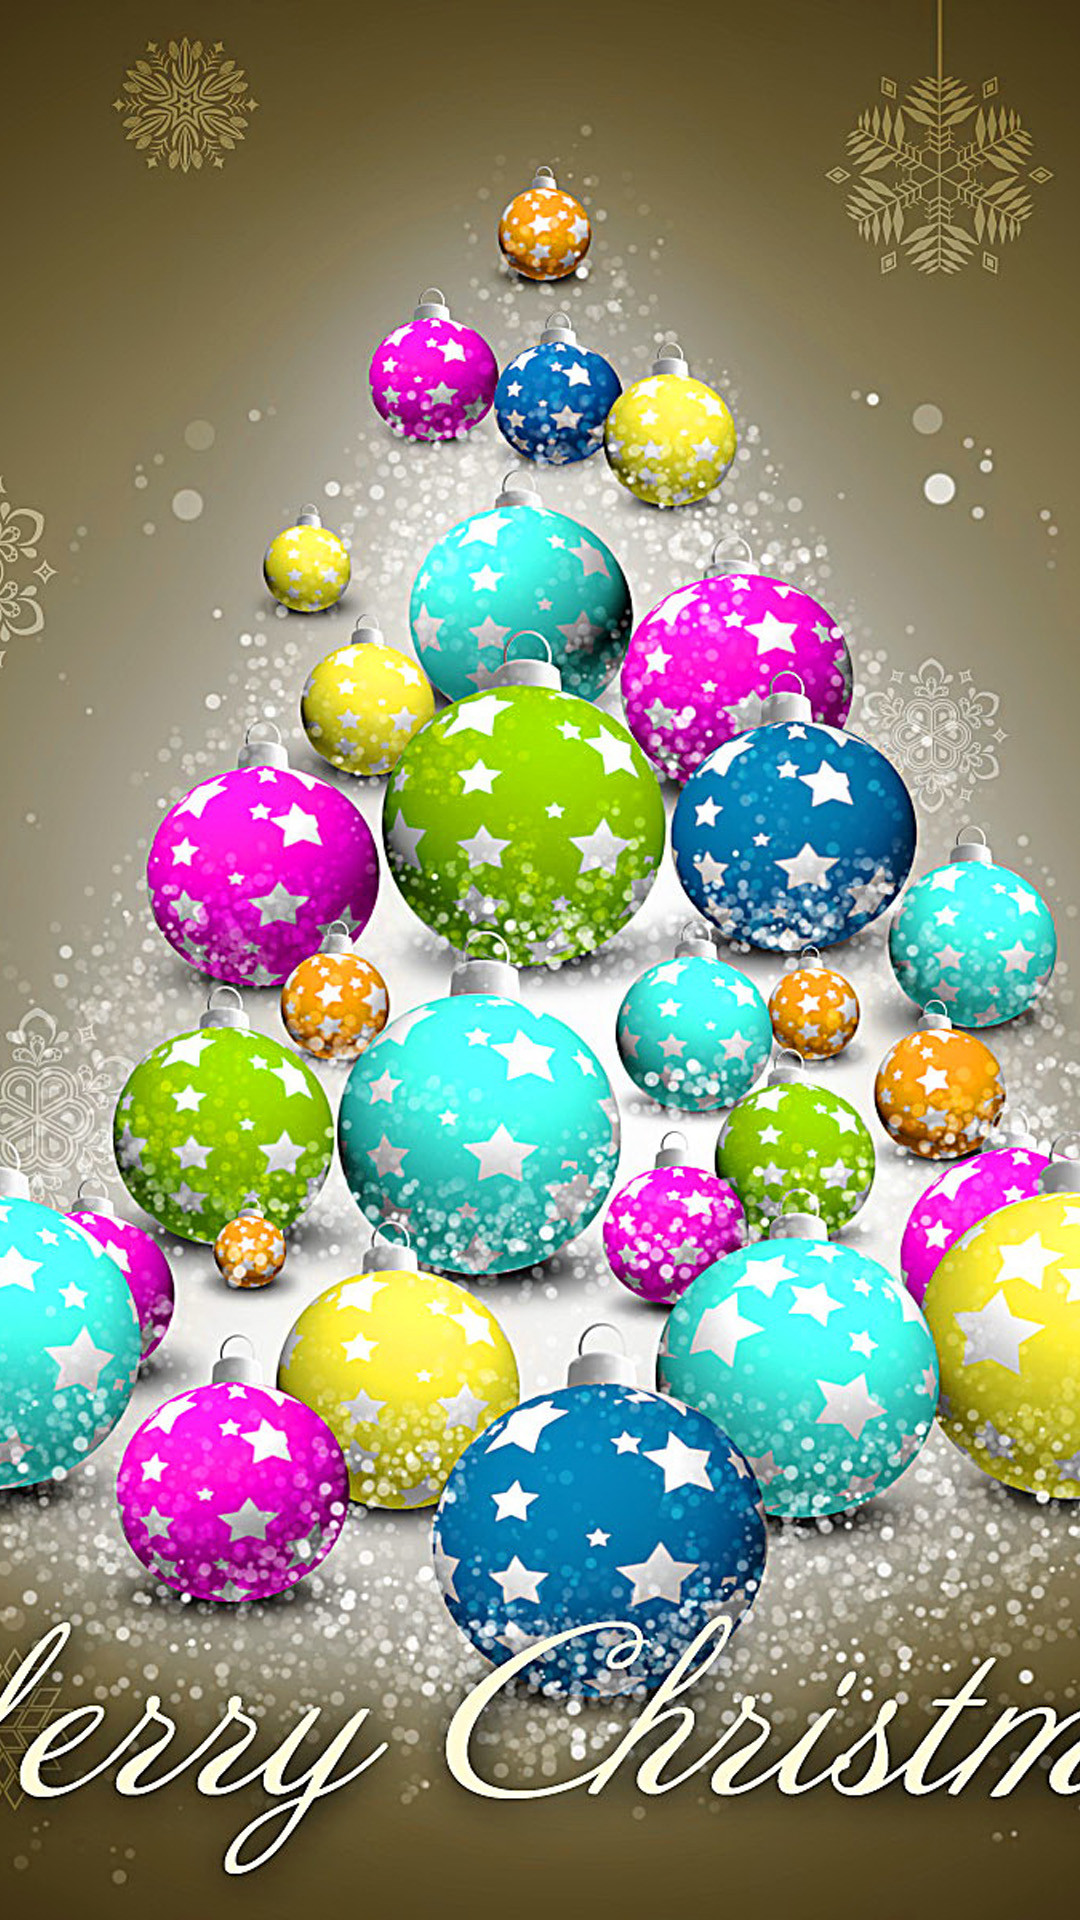 1080x1920 Colorful Christmas iphone wallpaper.